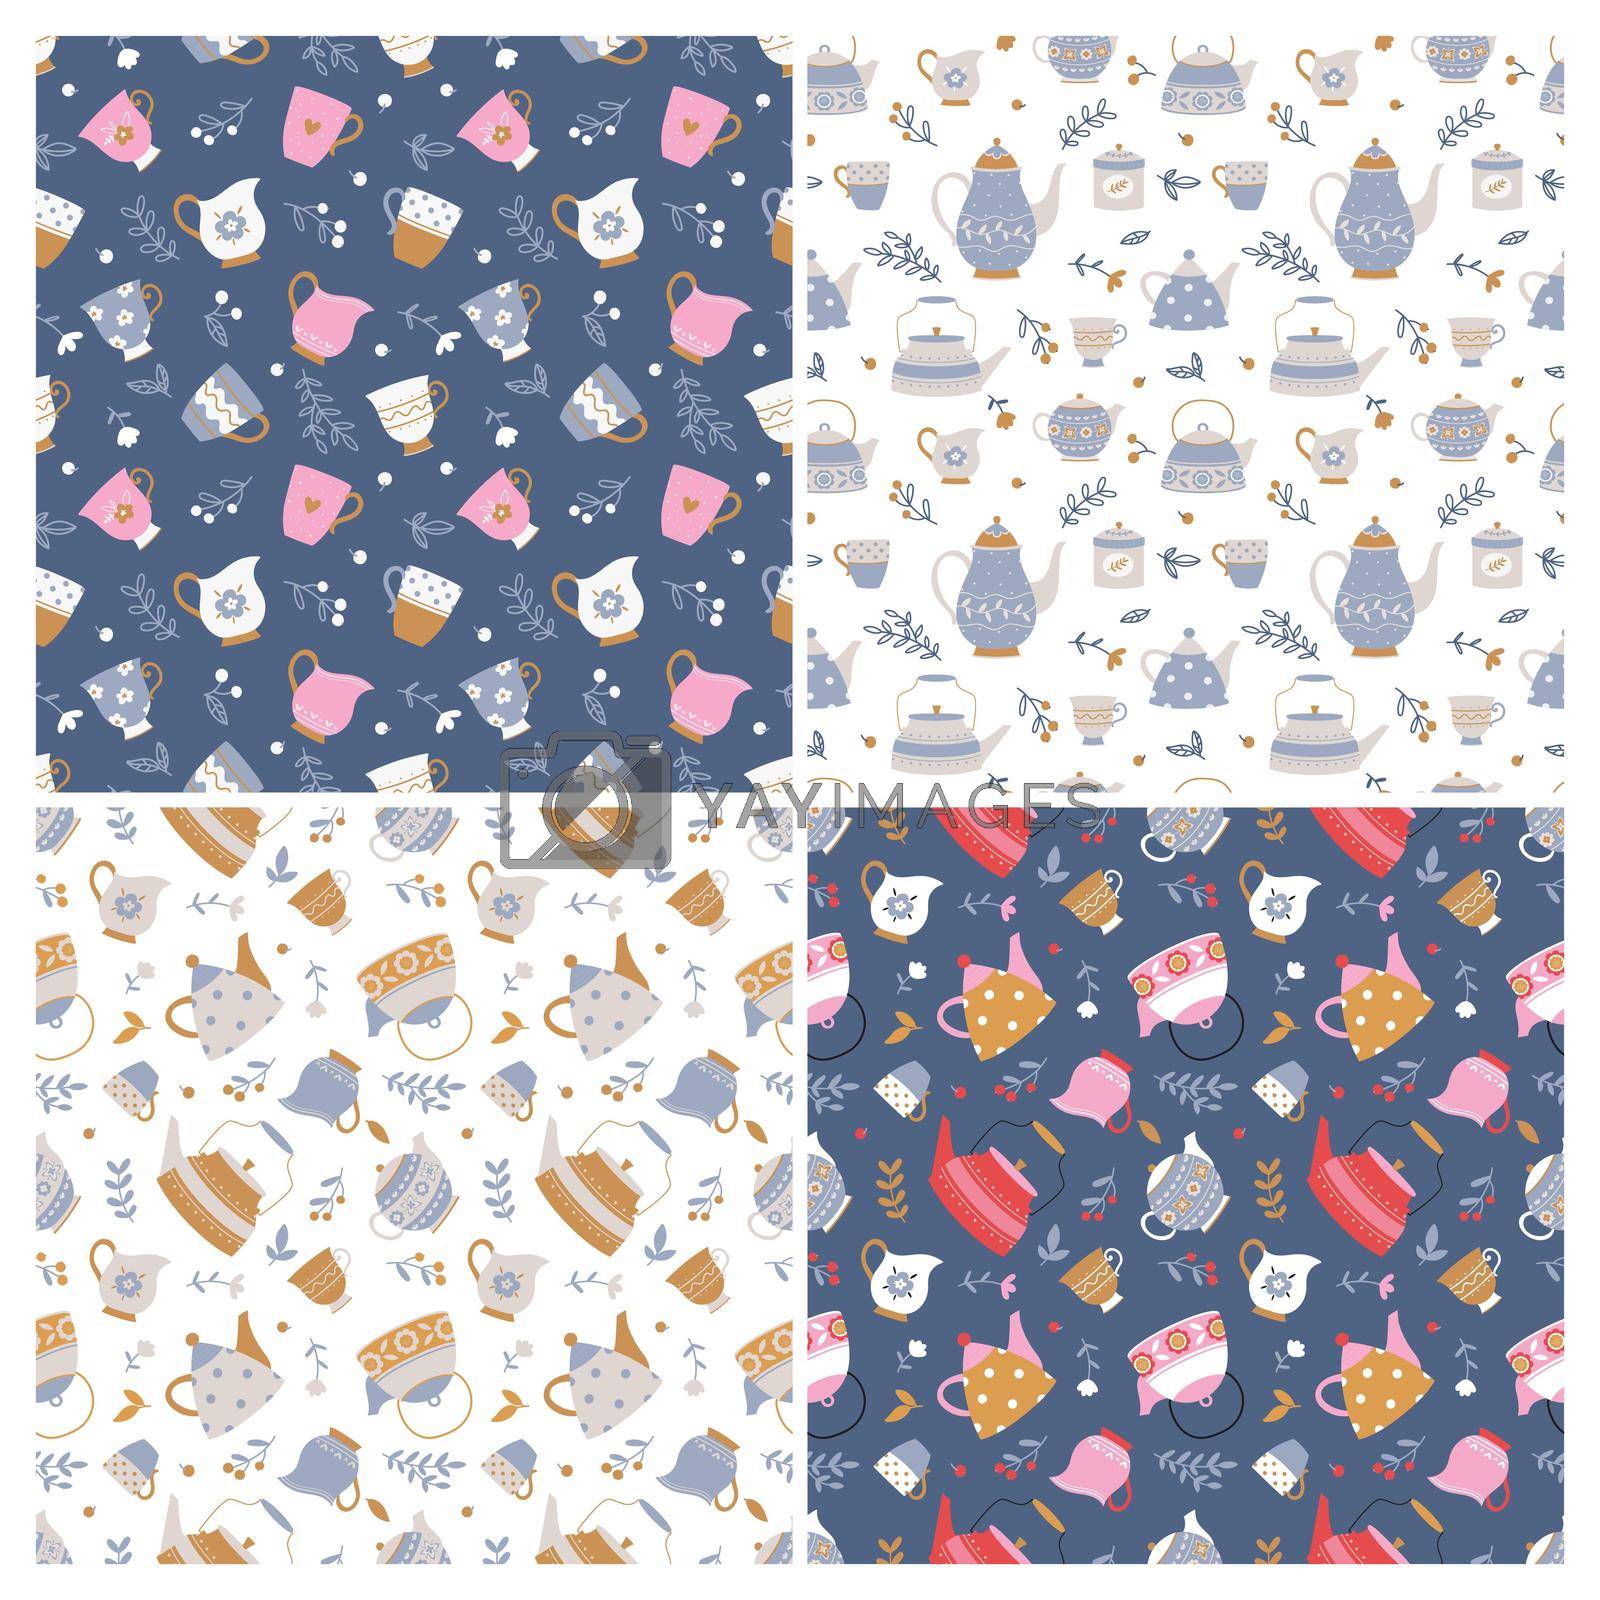 Set of seamless backgrounds with teapots and cups on a white and dark blue background. Simple cartoon style. Suitable for fabric, wallpaper, covers, etc. Vector illustration.